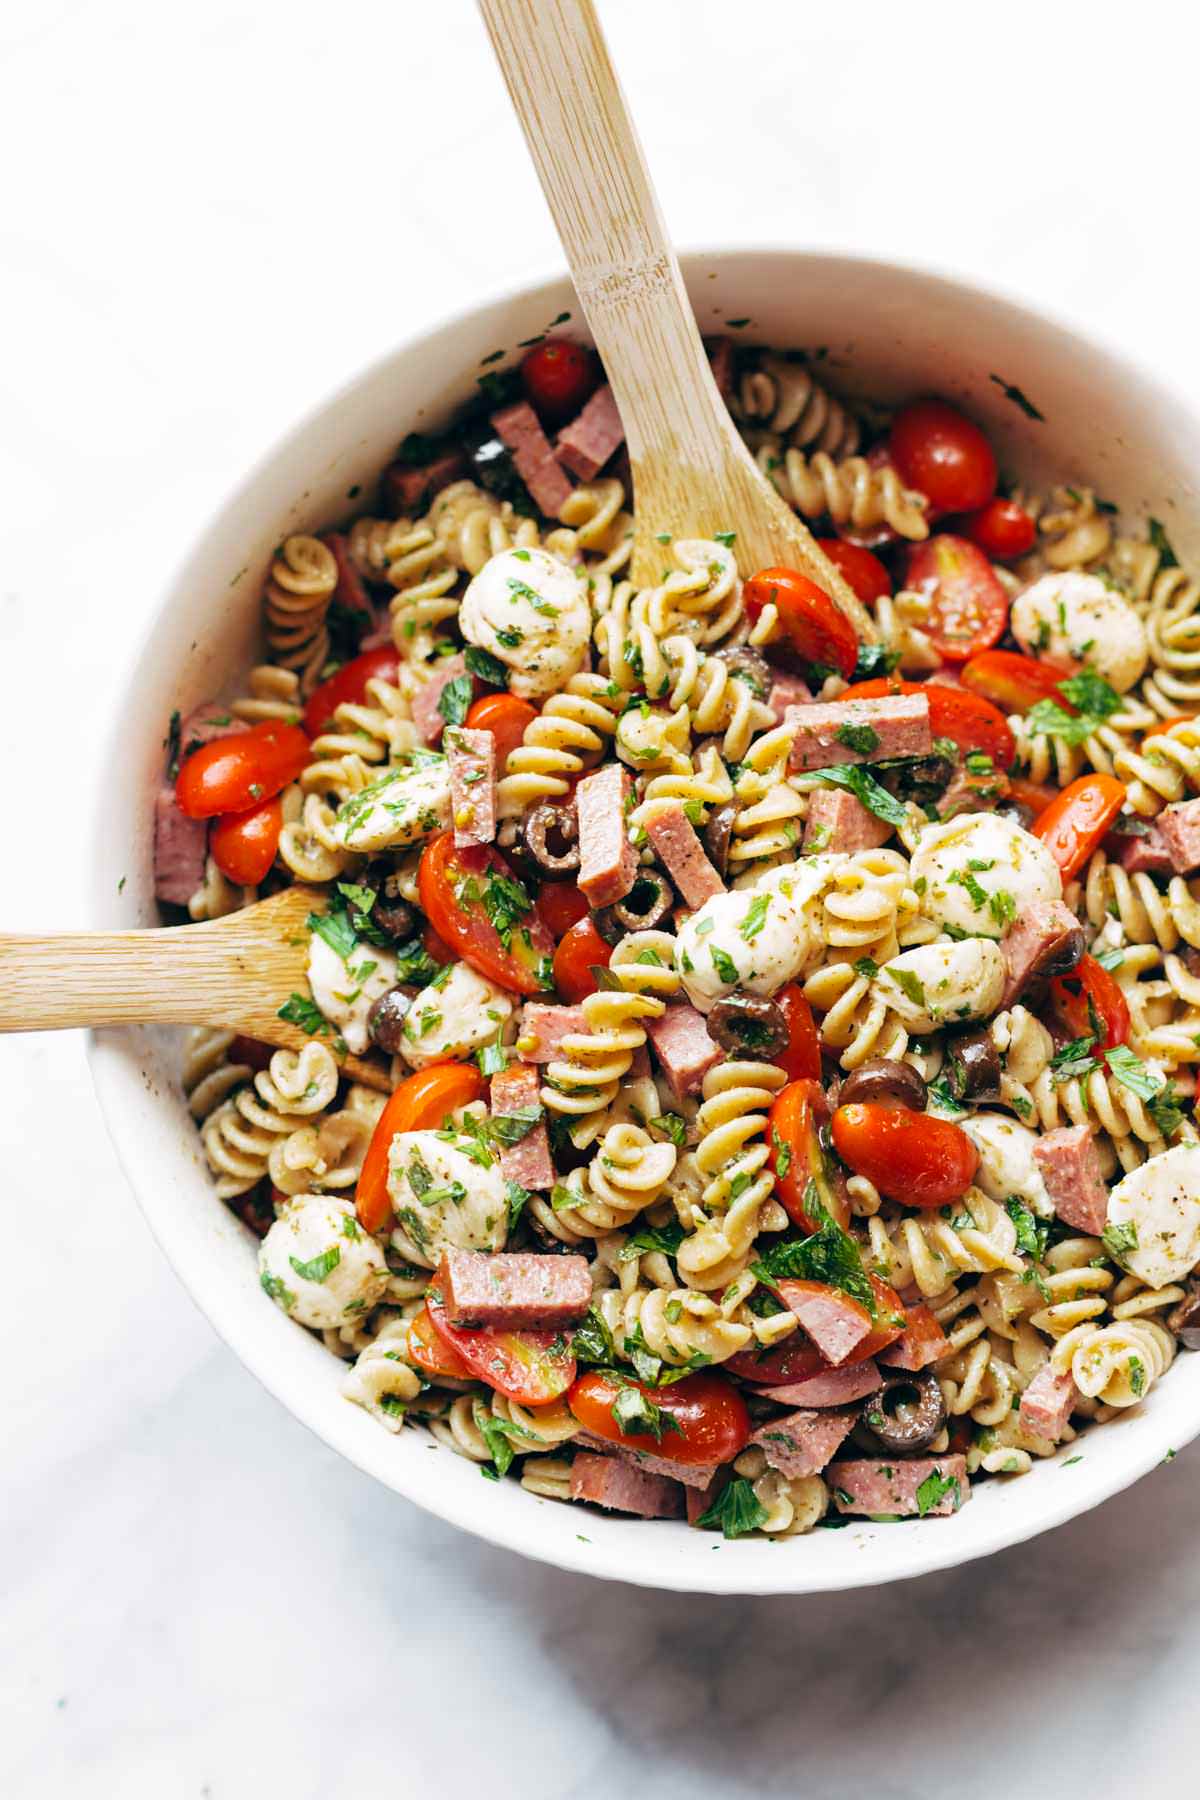 15 favorite pasta salad with Italian dressing recipes - My Mommy Style